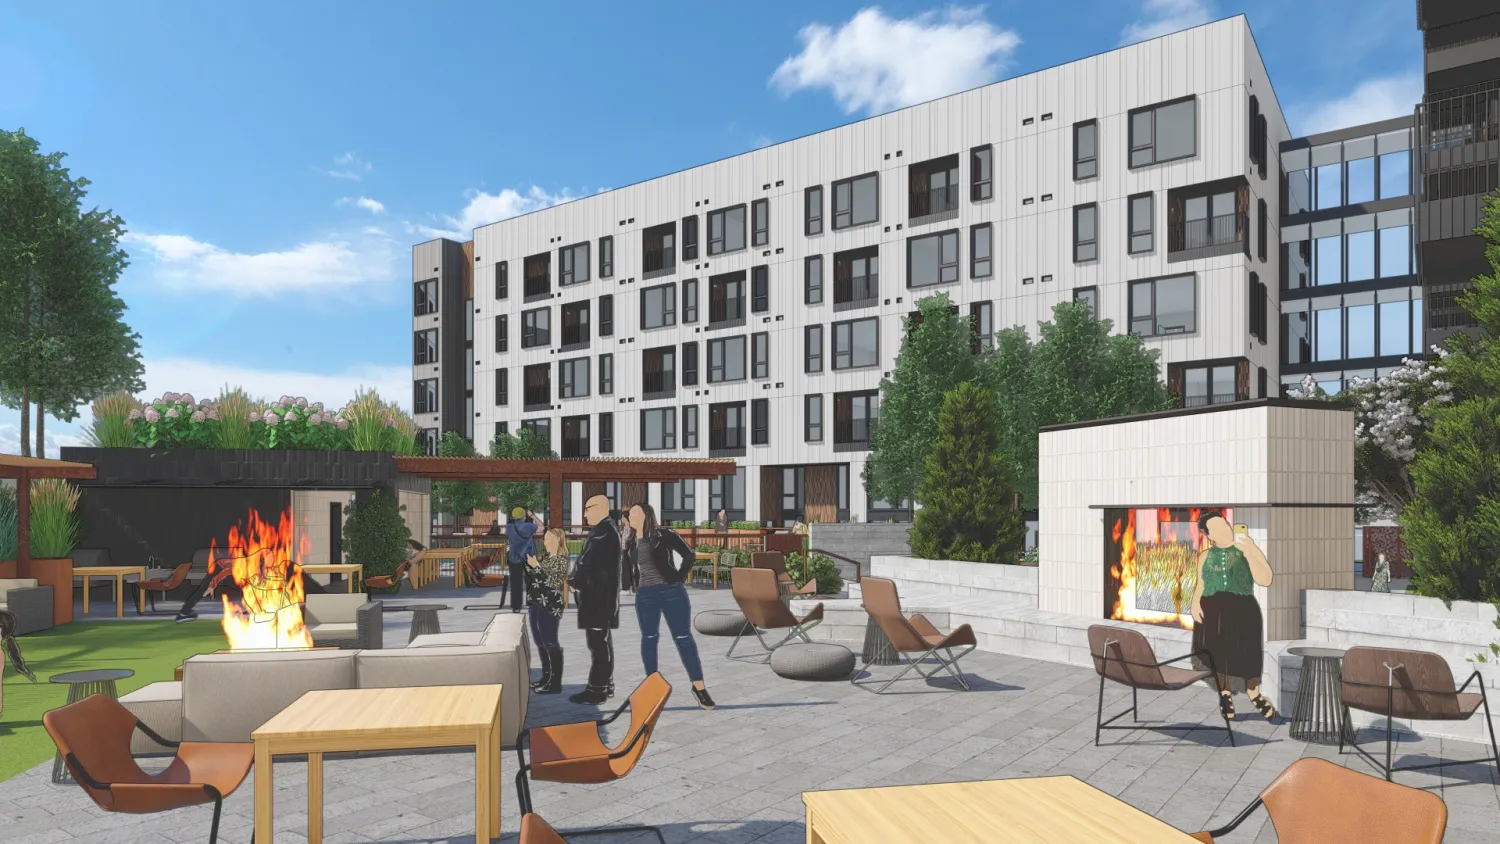 Exterior rendering of the residential patio with seating and fire pits at Union Brick in Nashville, Tennessee.